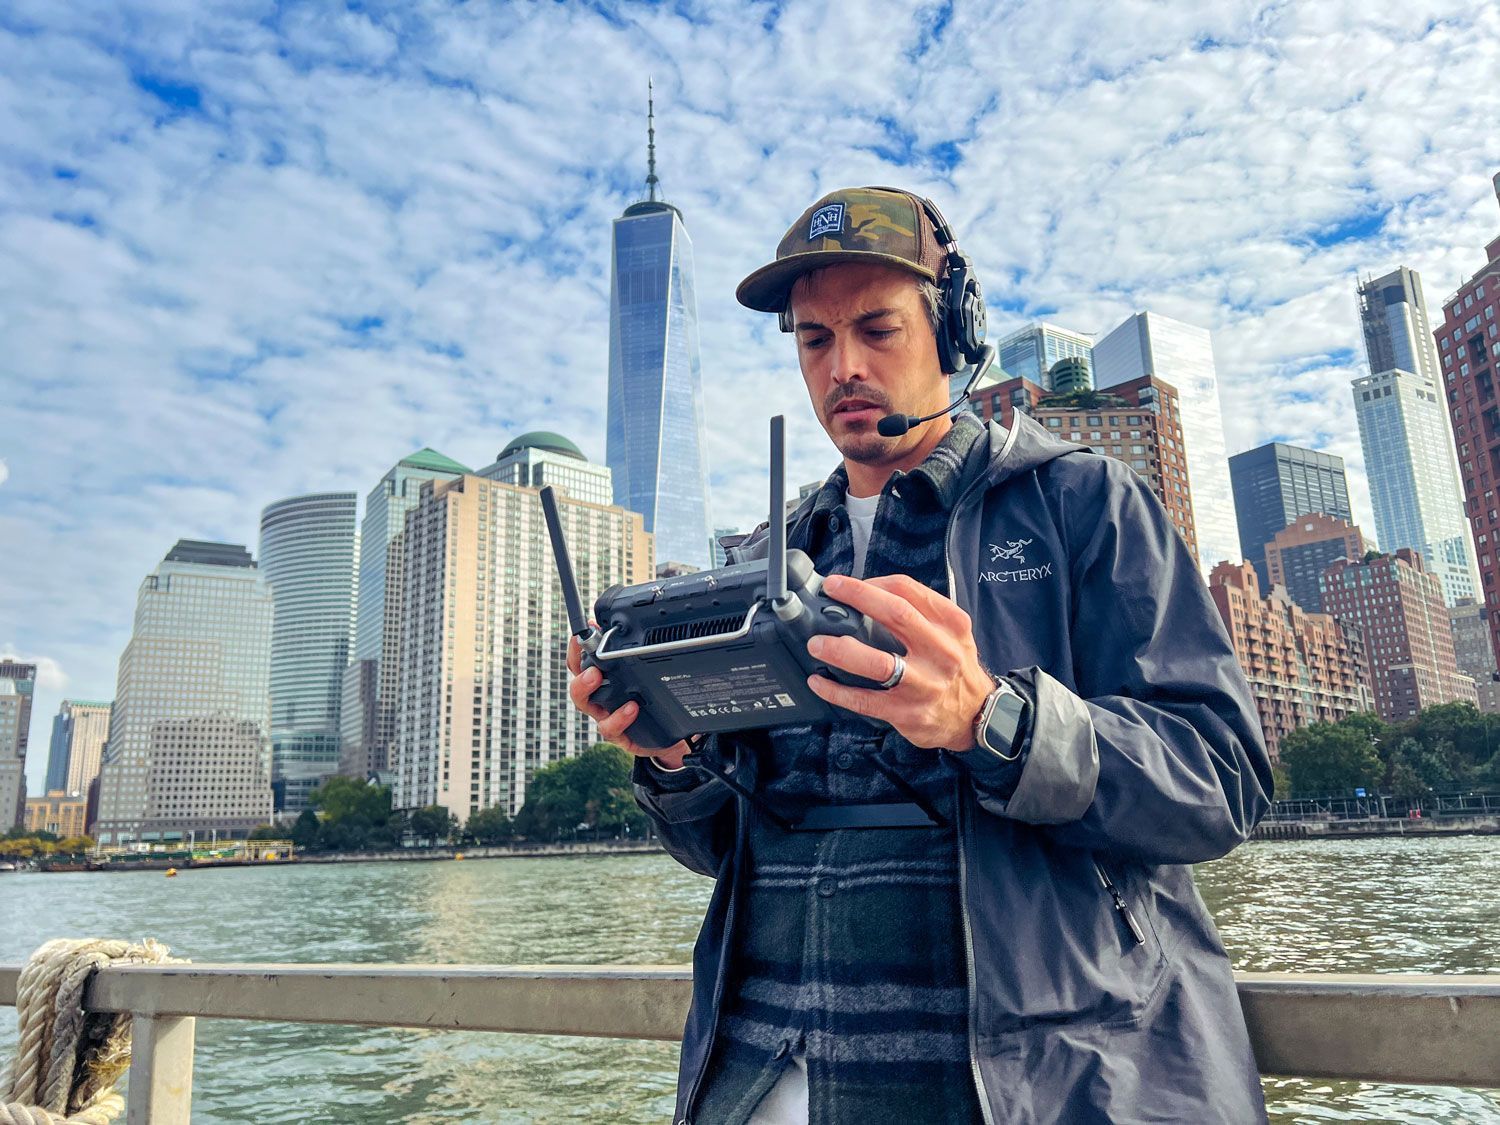 A man is holding a remote control in front of a city skyline.